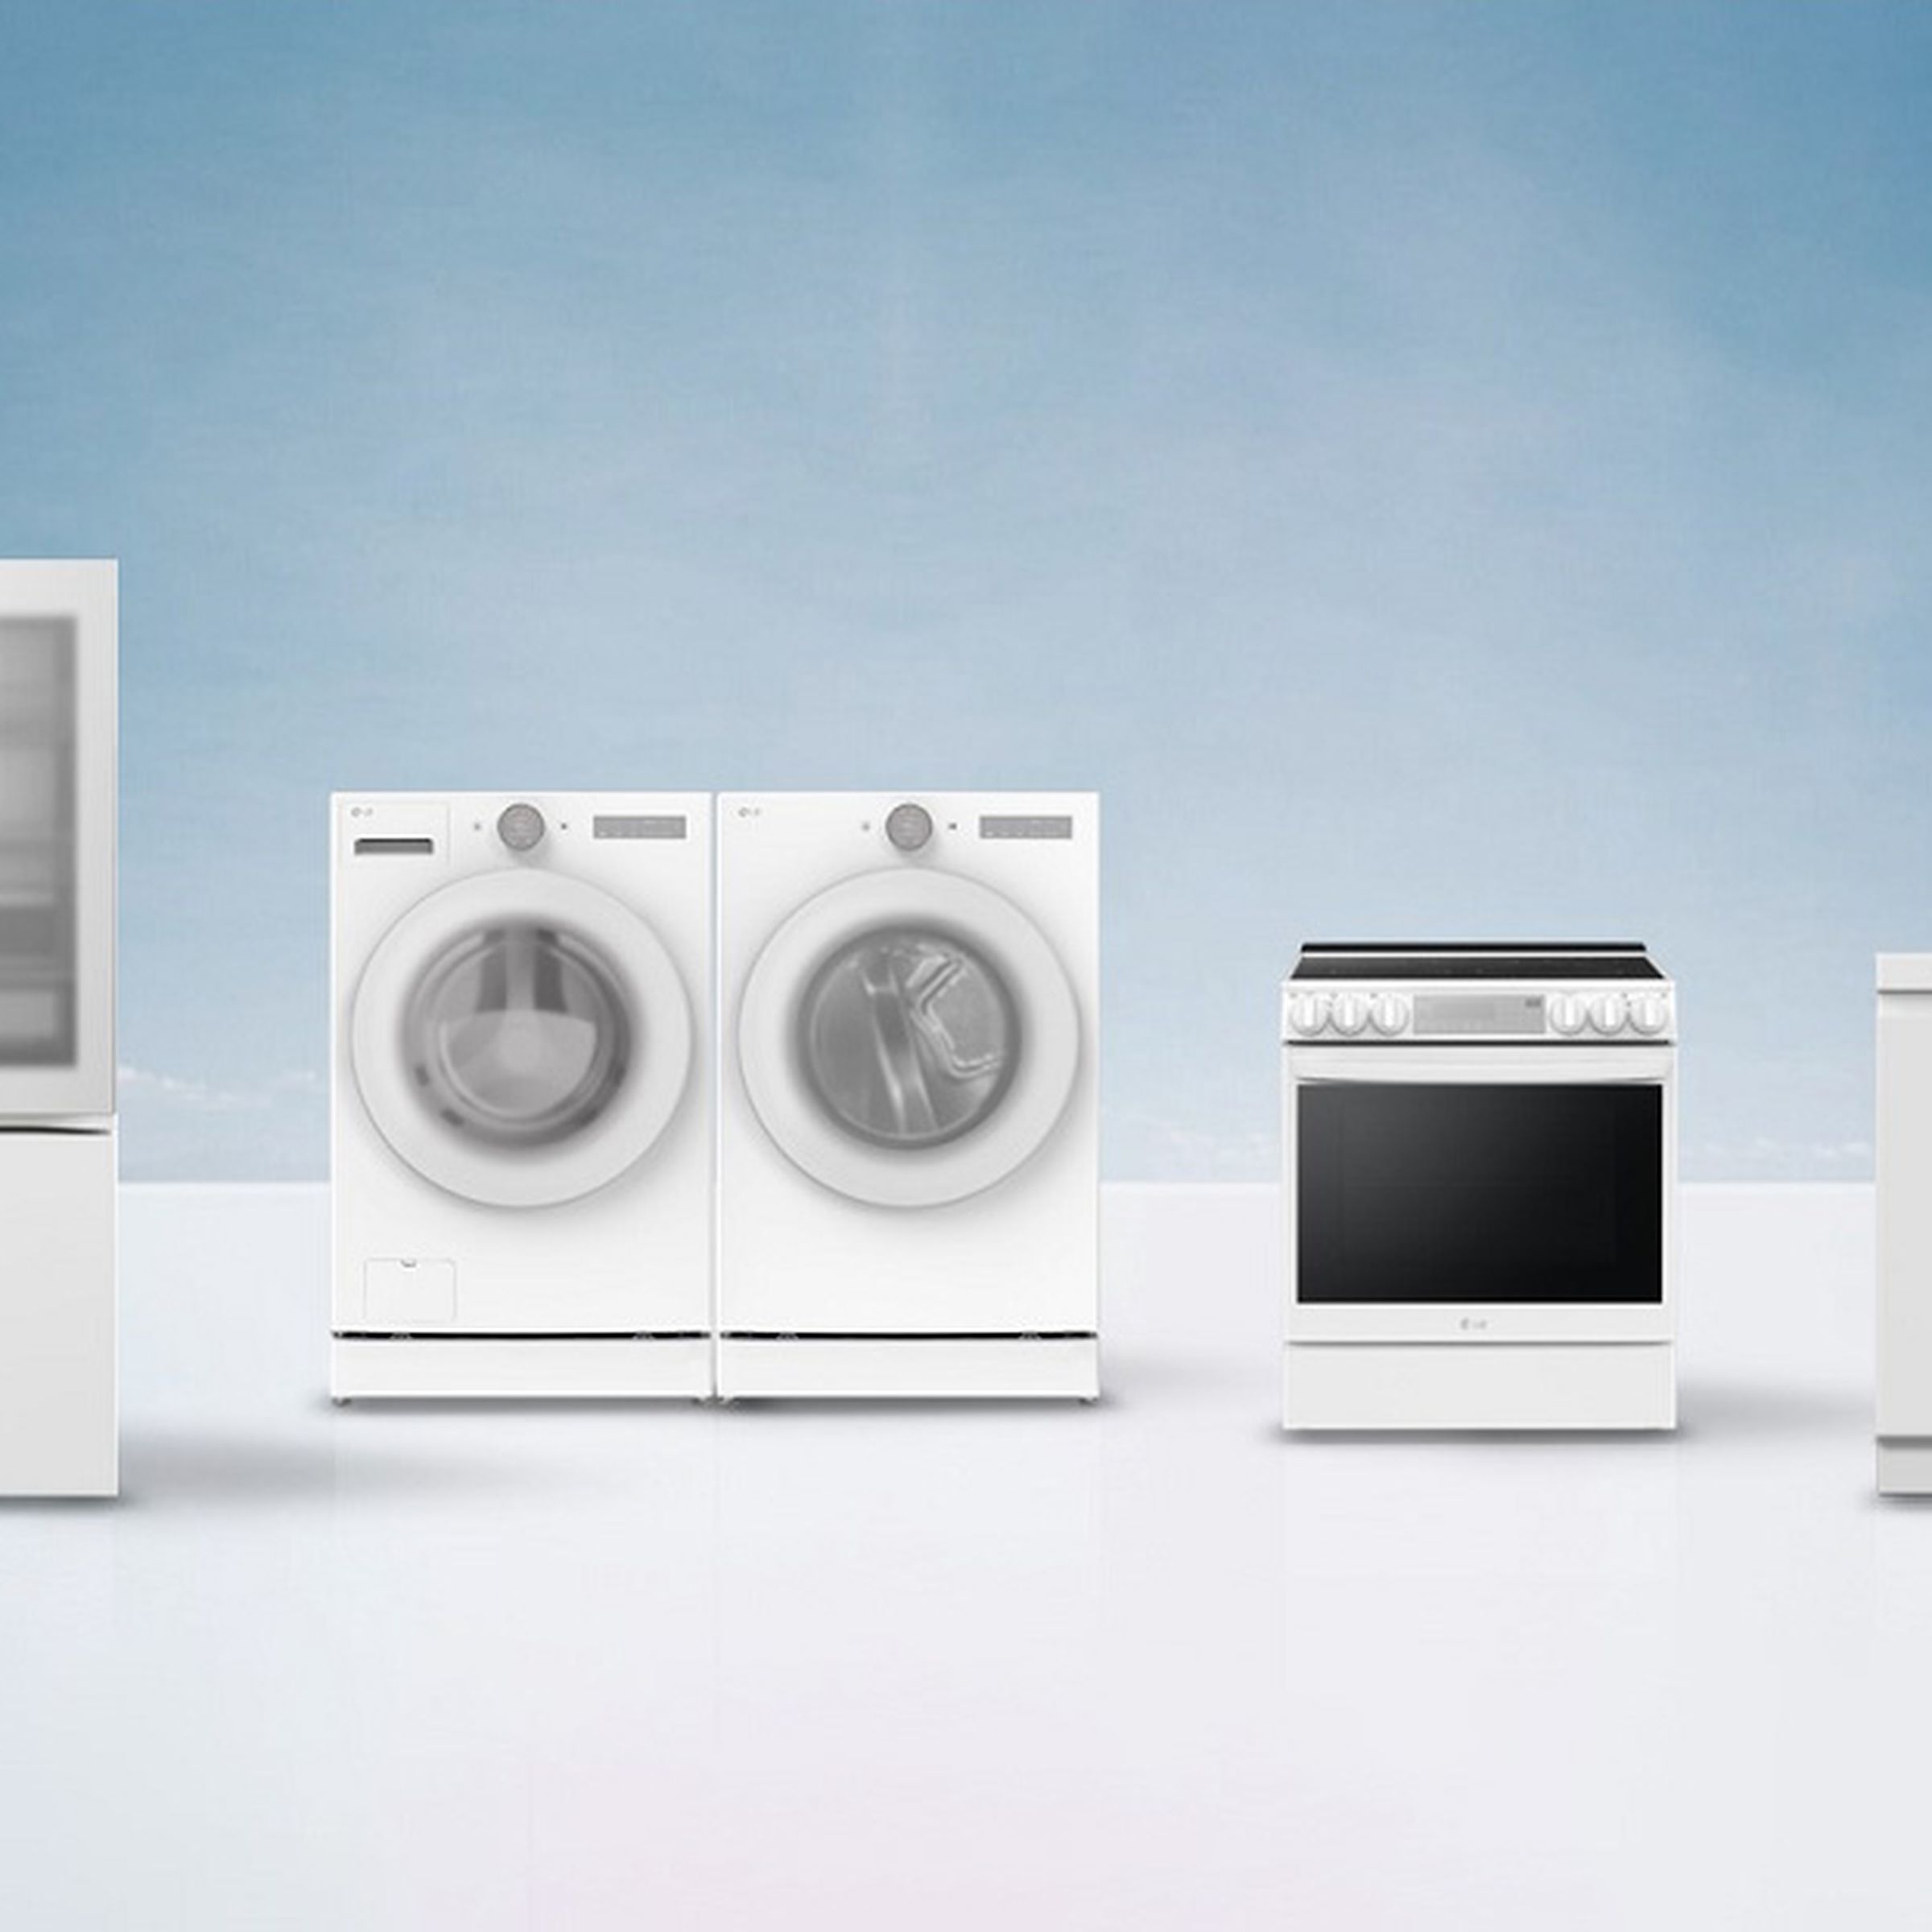 Photo of LG’s all white fridge, washing machine, dryer, oven, and dishwasher showing cleaner design on white and blue background.